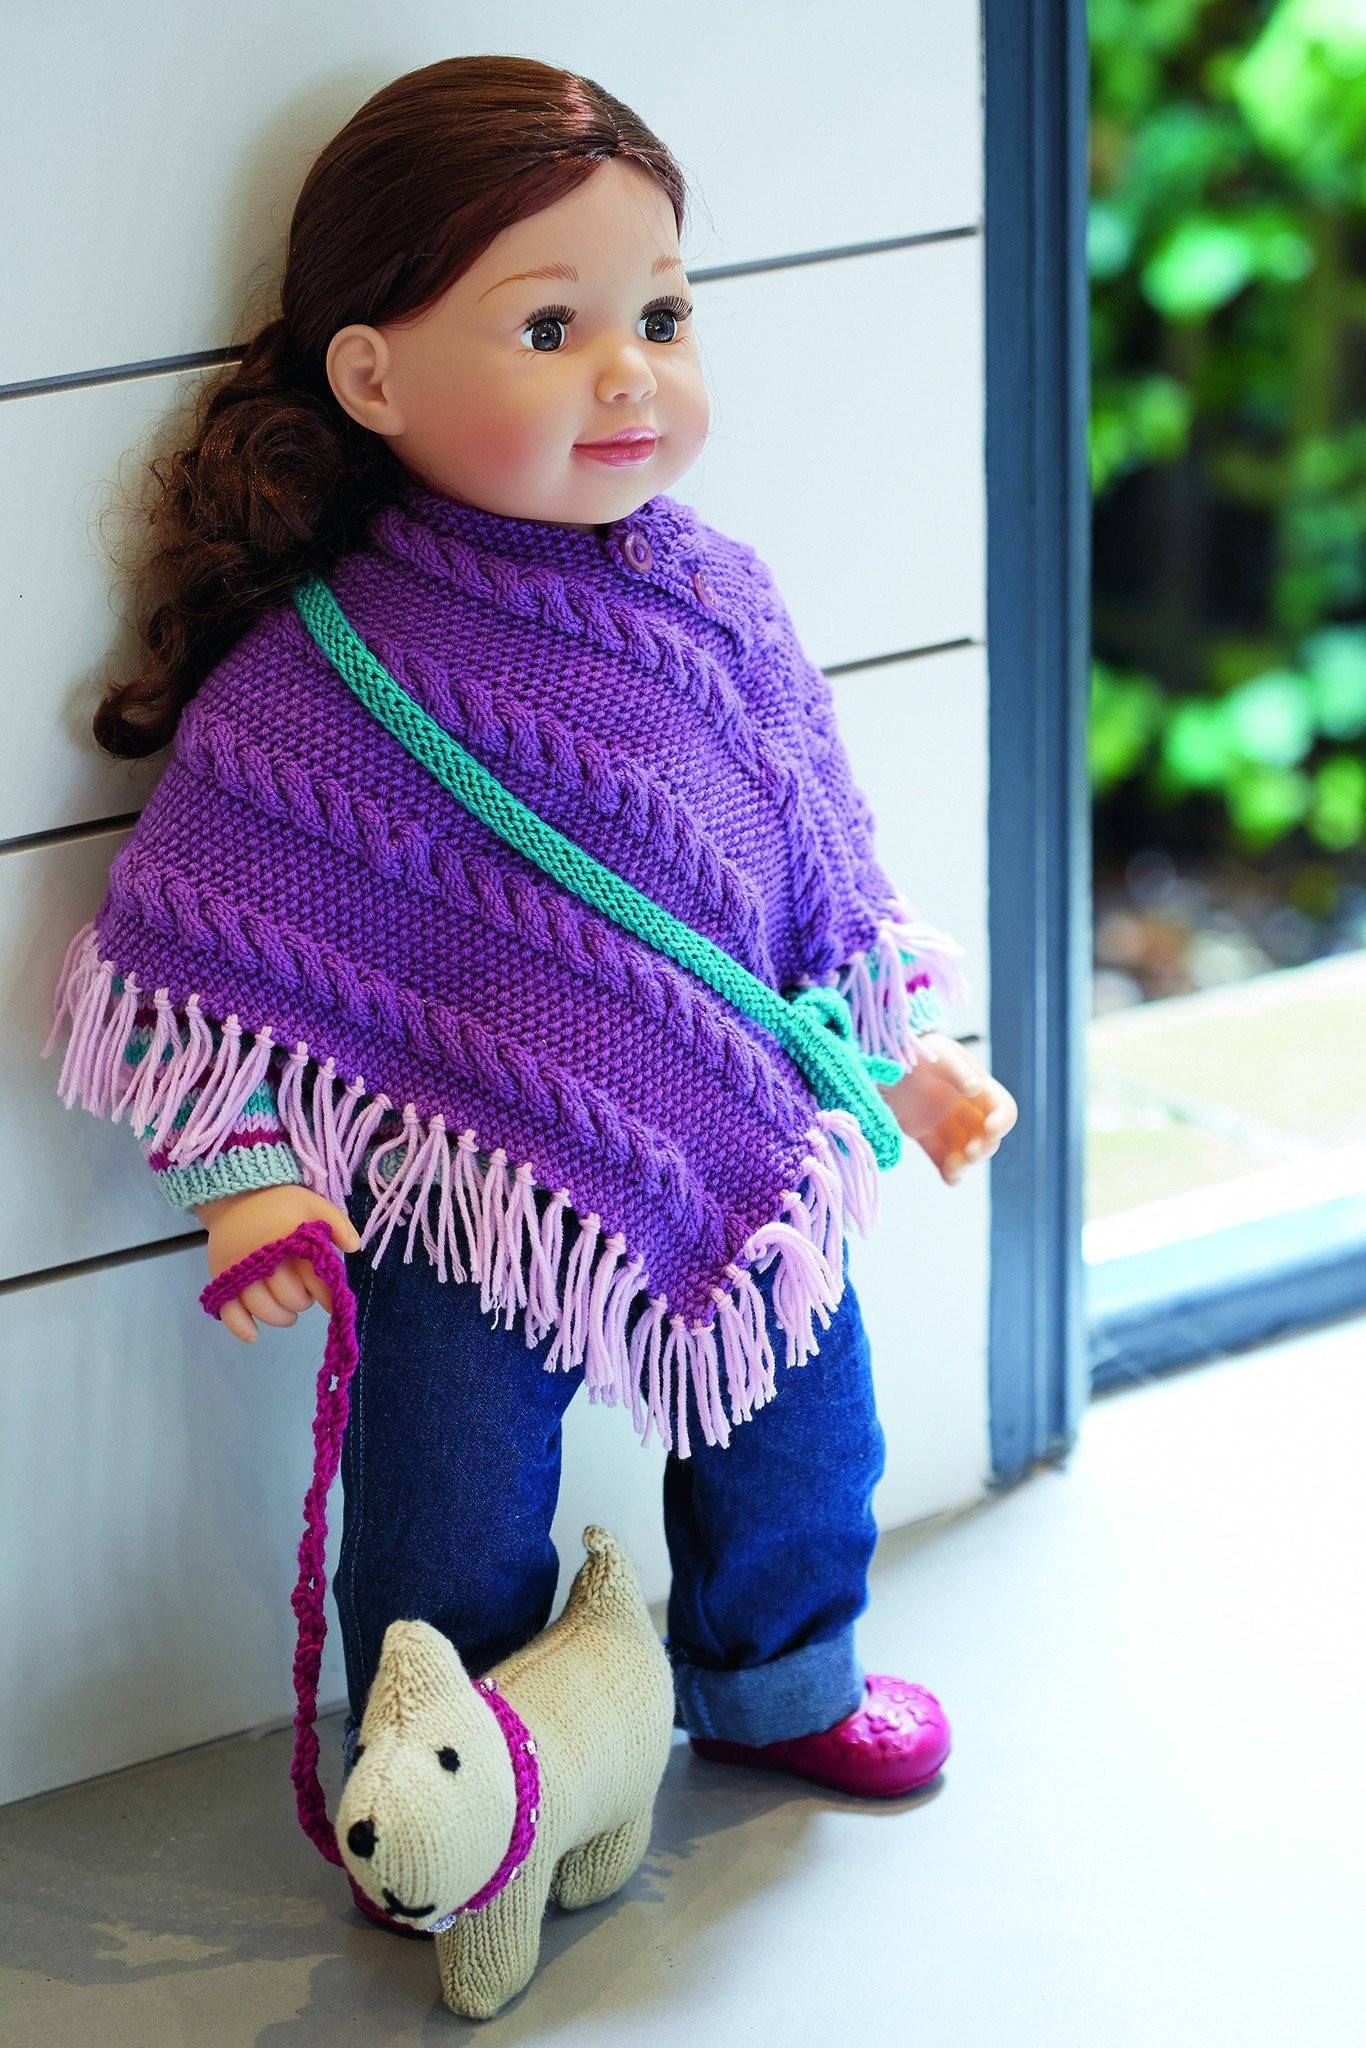 Doll Clothes And Dog Knitting Patterns | The Knitting Network